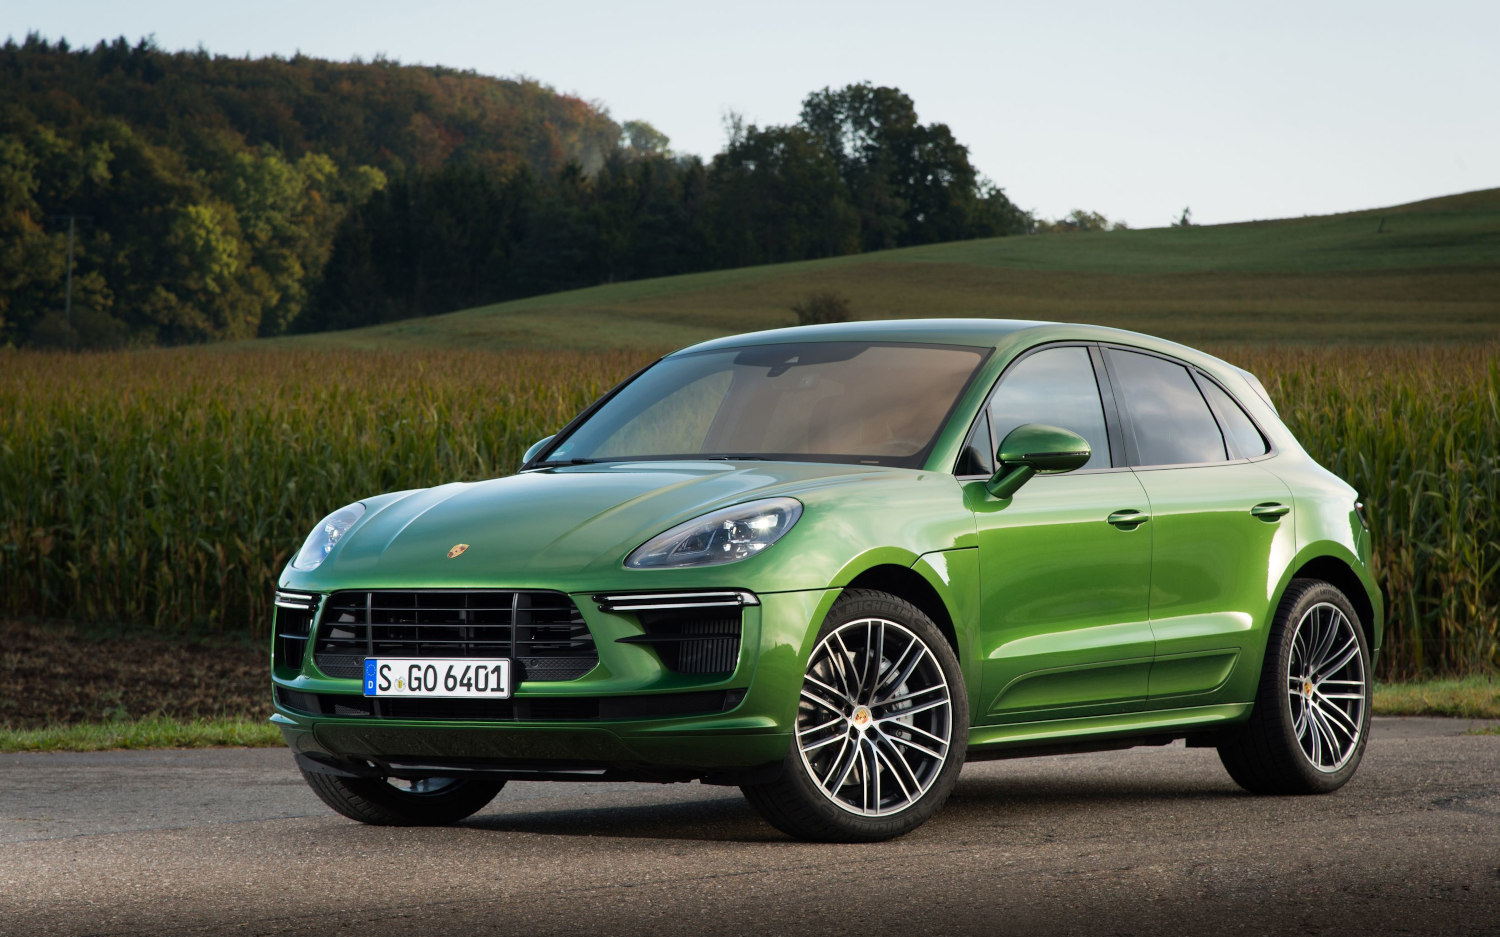 45 angle front Porsche Macan Turbo 2020